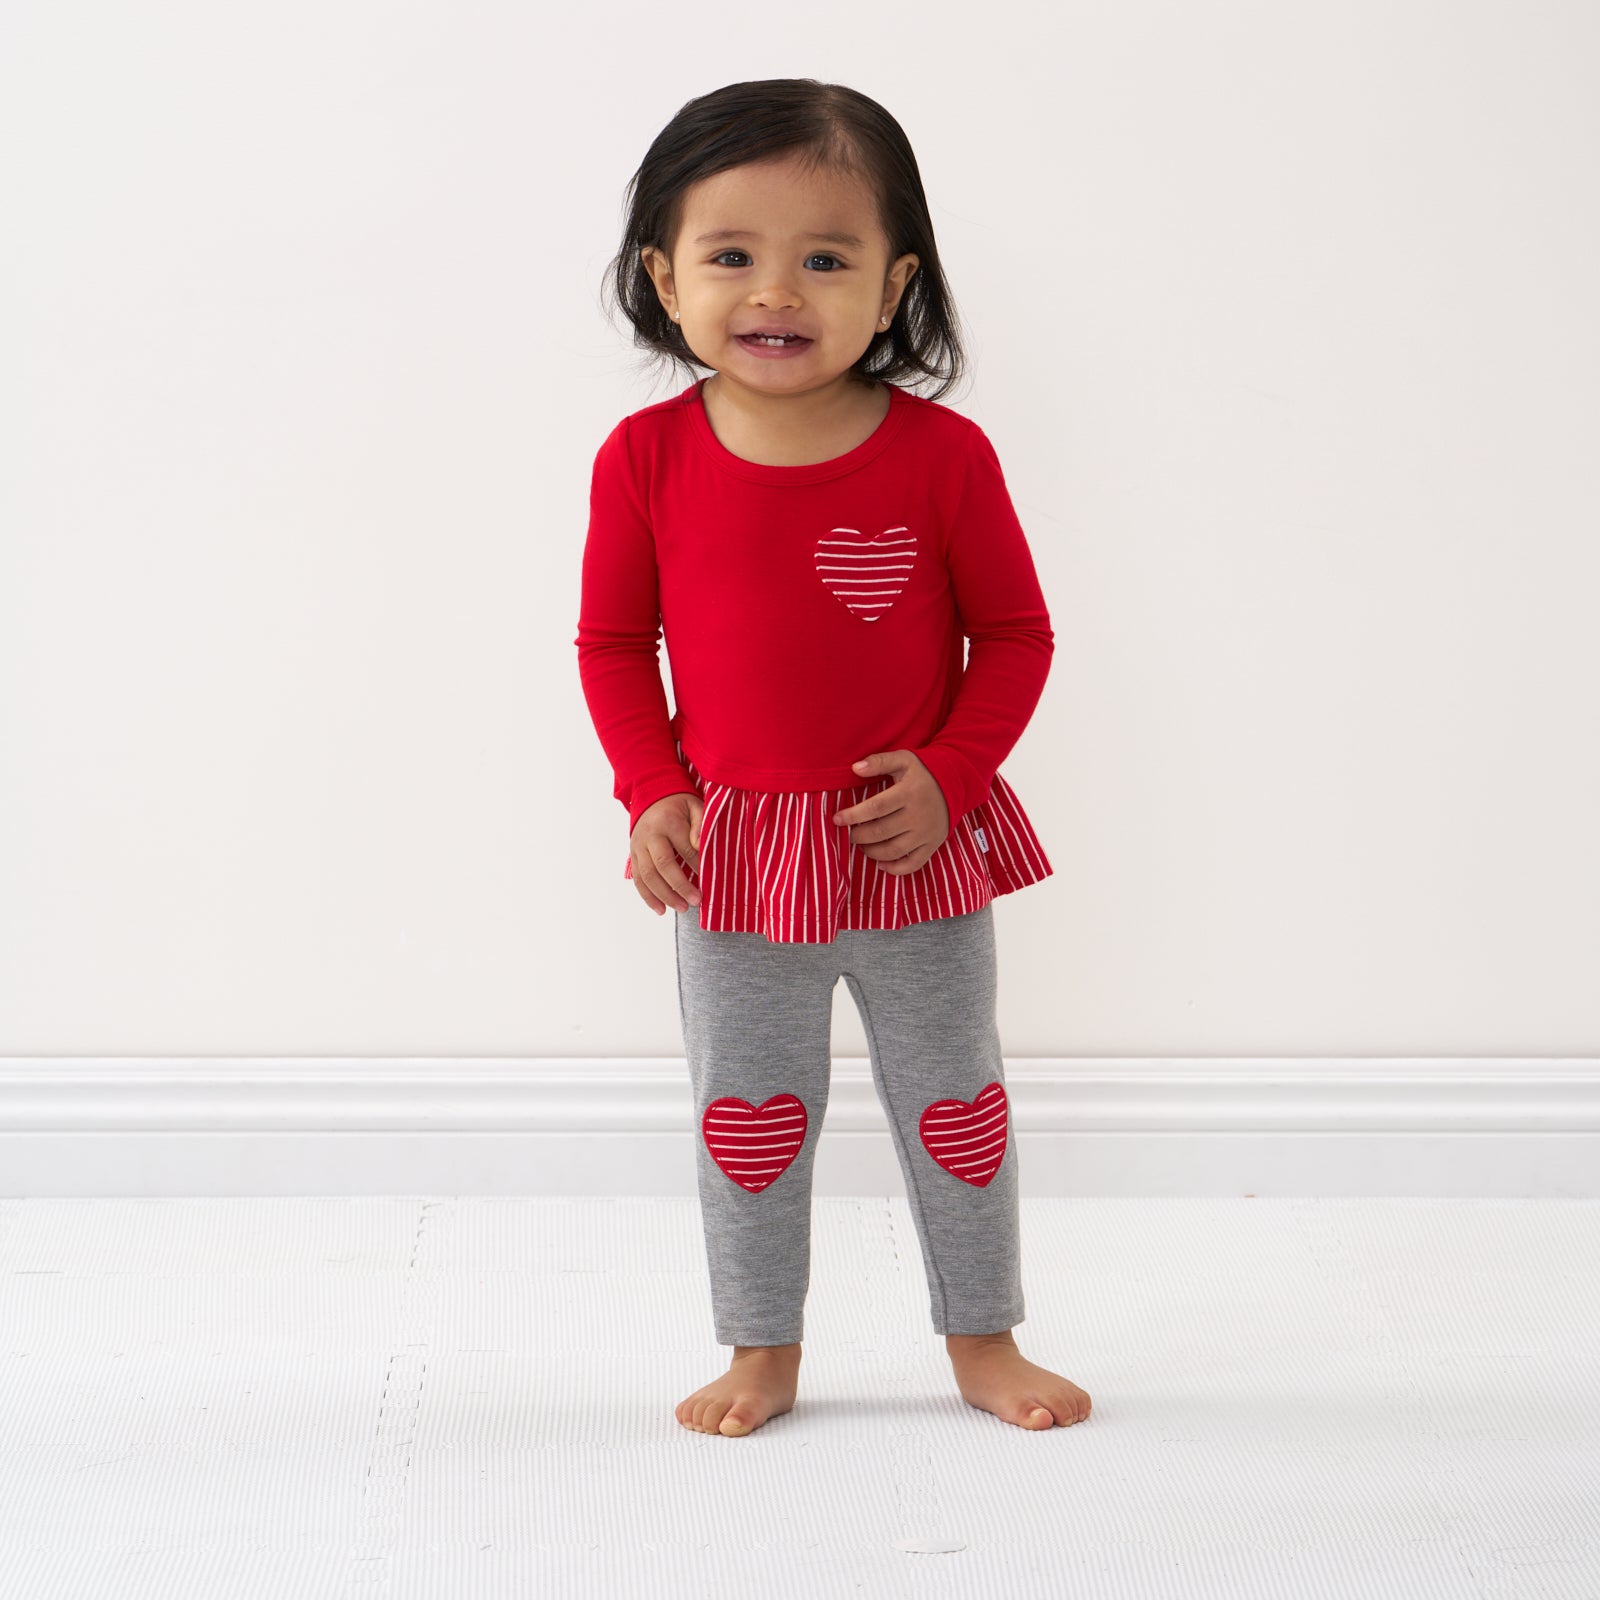 Alternate image of a child wearing Heart Patch leggings and coordinating peplum tee